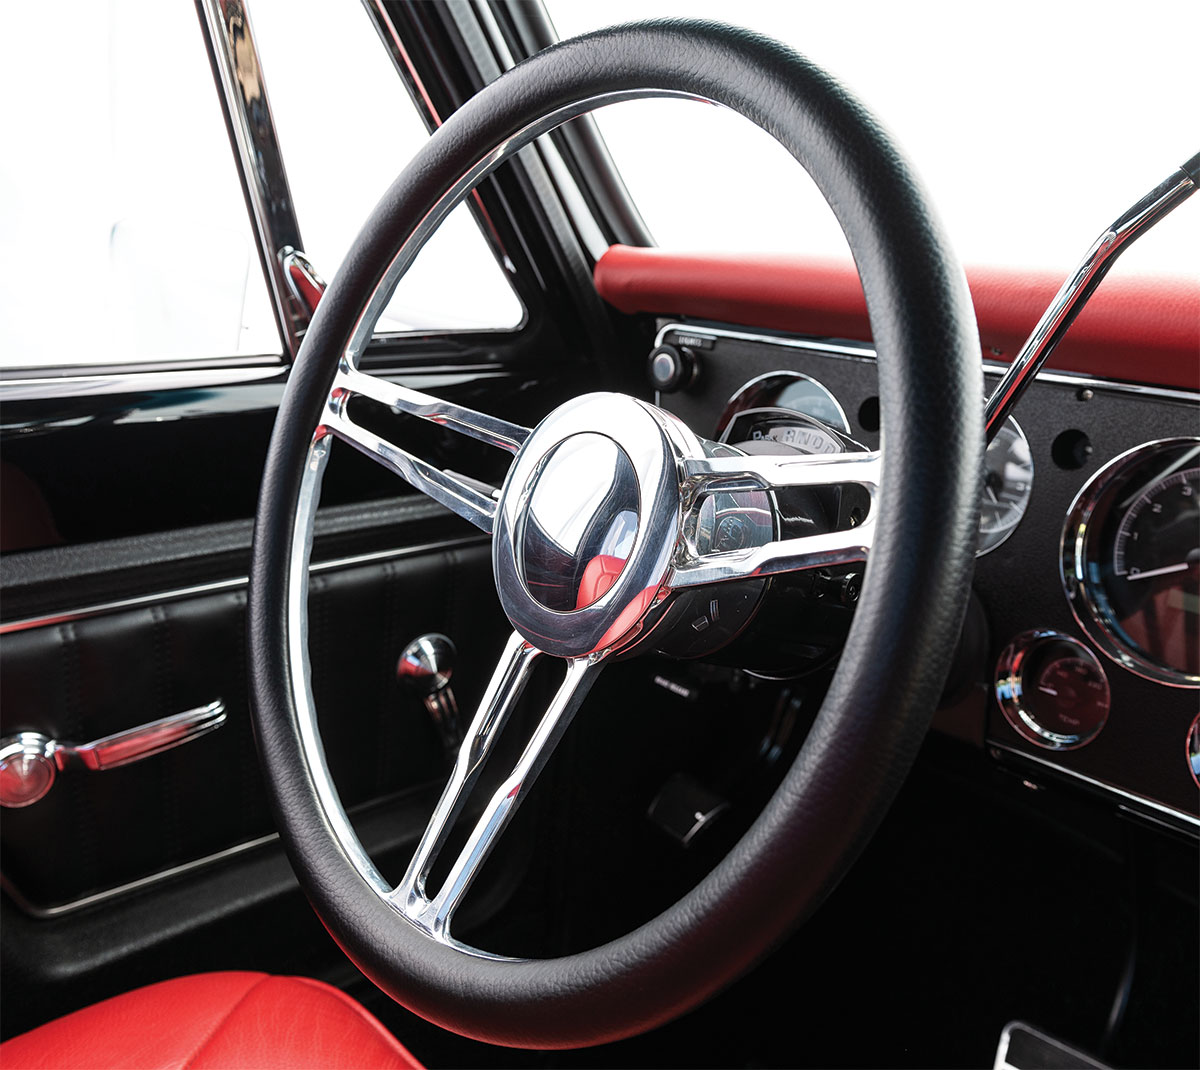 1971 Chevy steering wheel up close